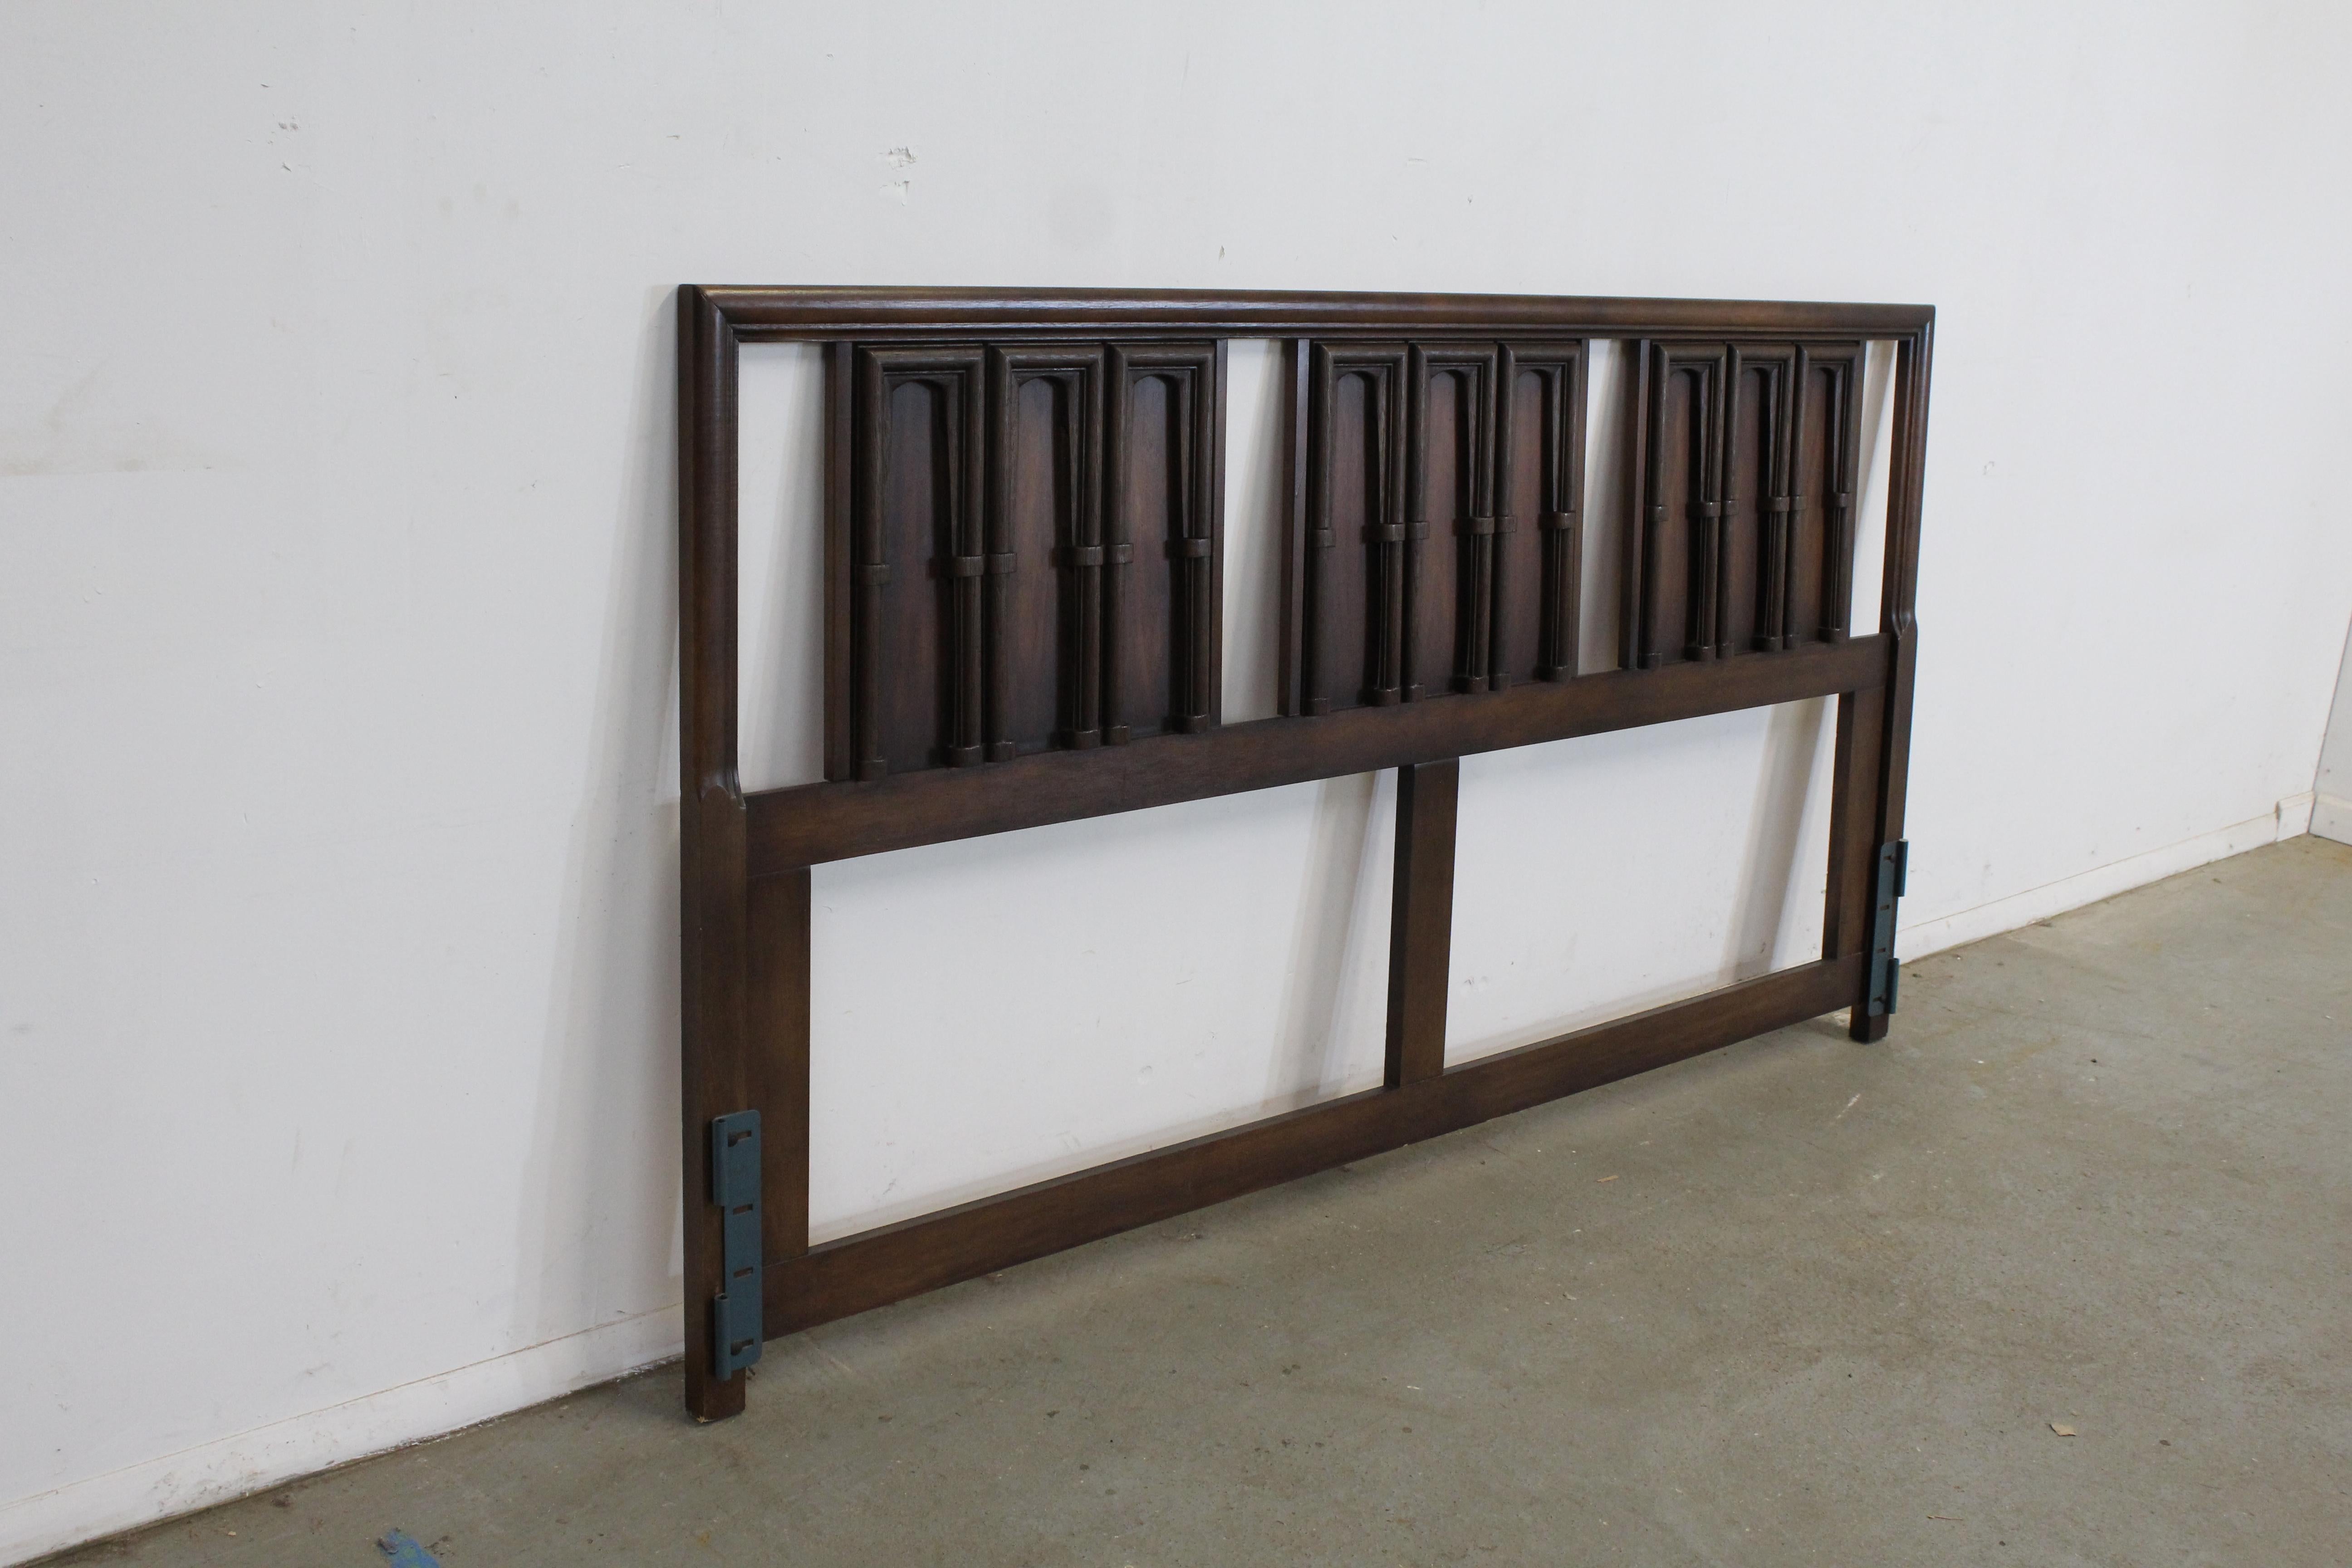 Offered is a Mid-Century Danish Modern king size headboard. This piece has the look. It was made by Broyhill 